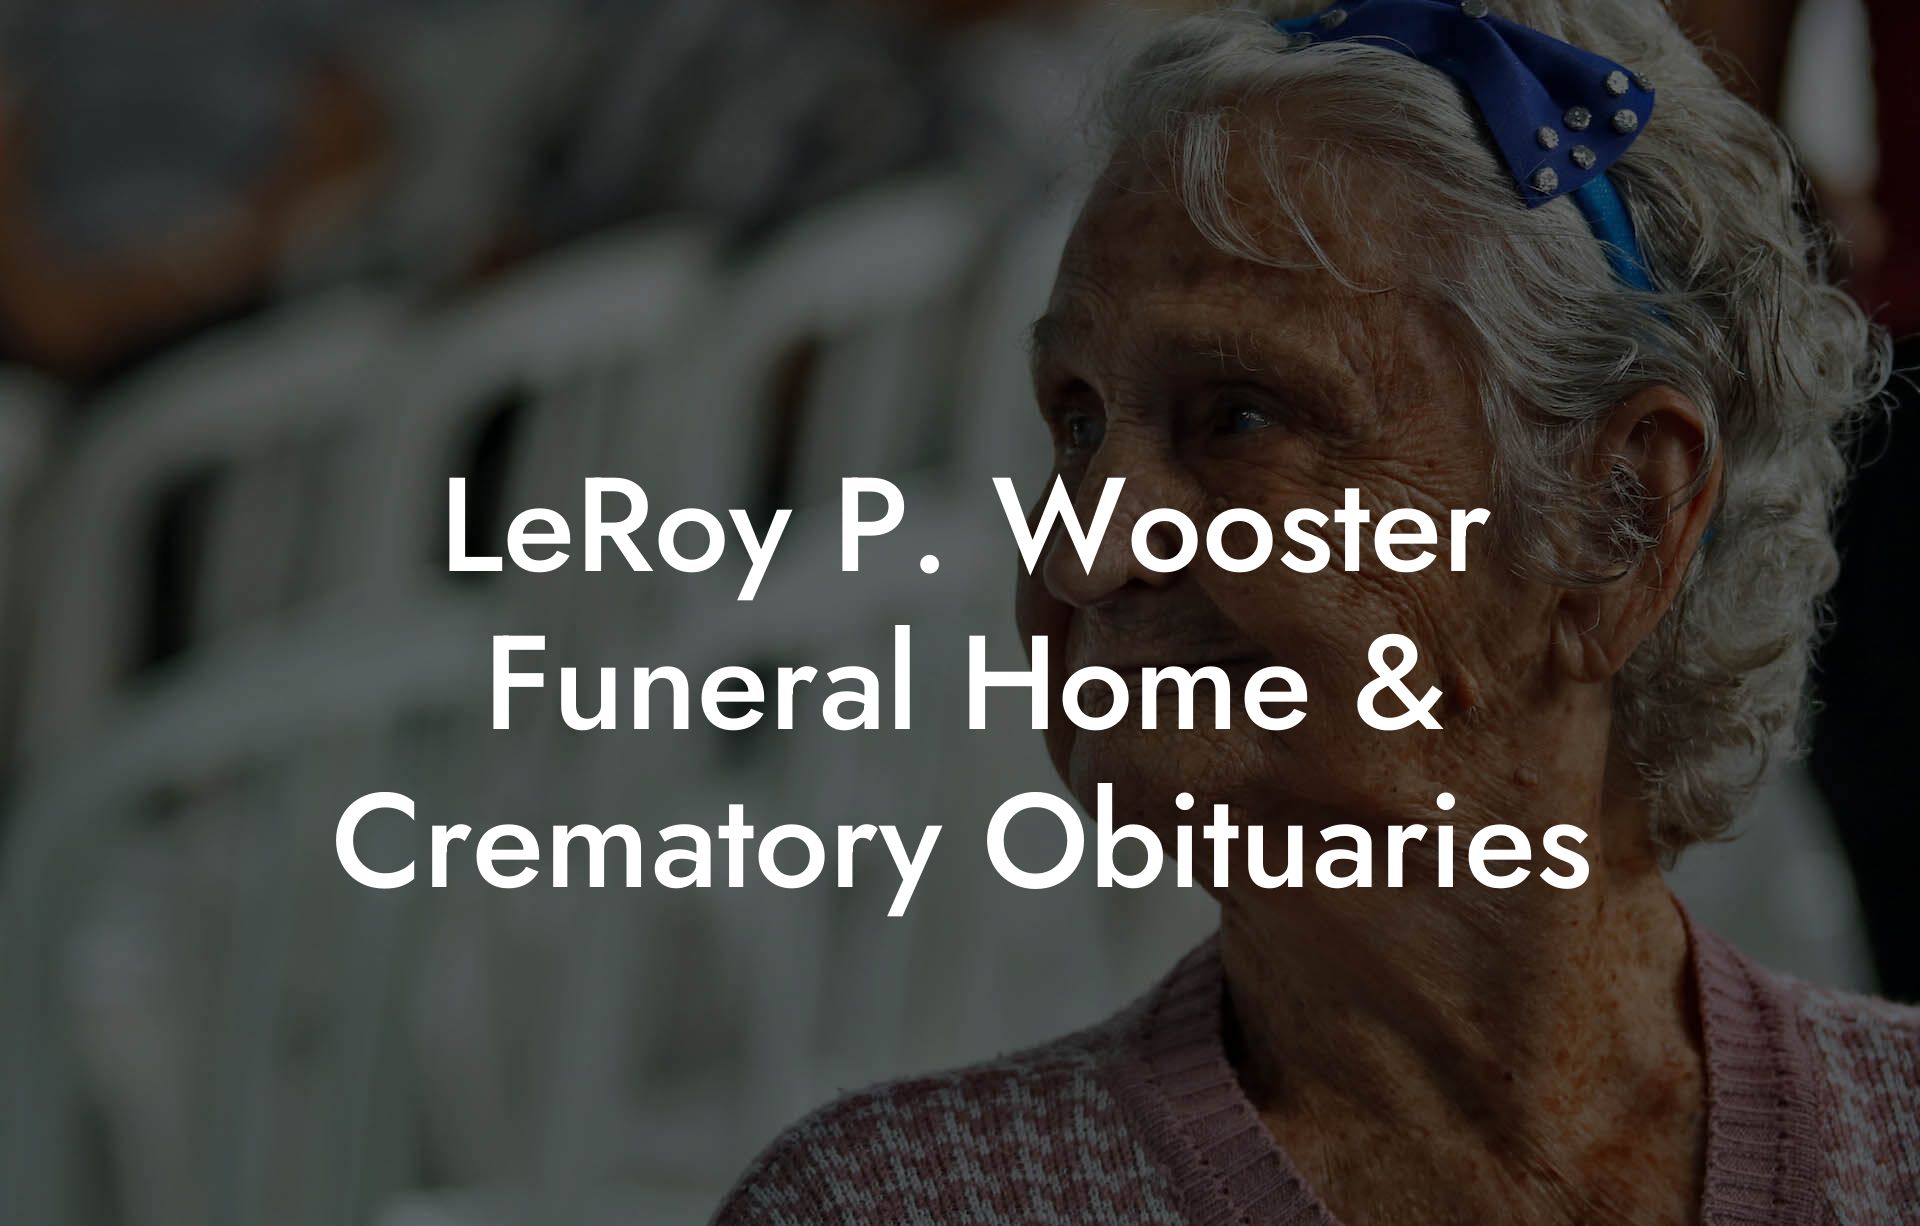 LeRoy P Wooster Funeral Home & Crematory Obituaries